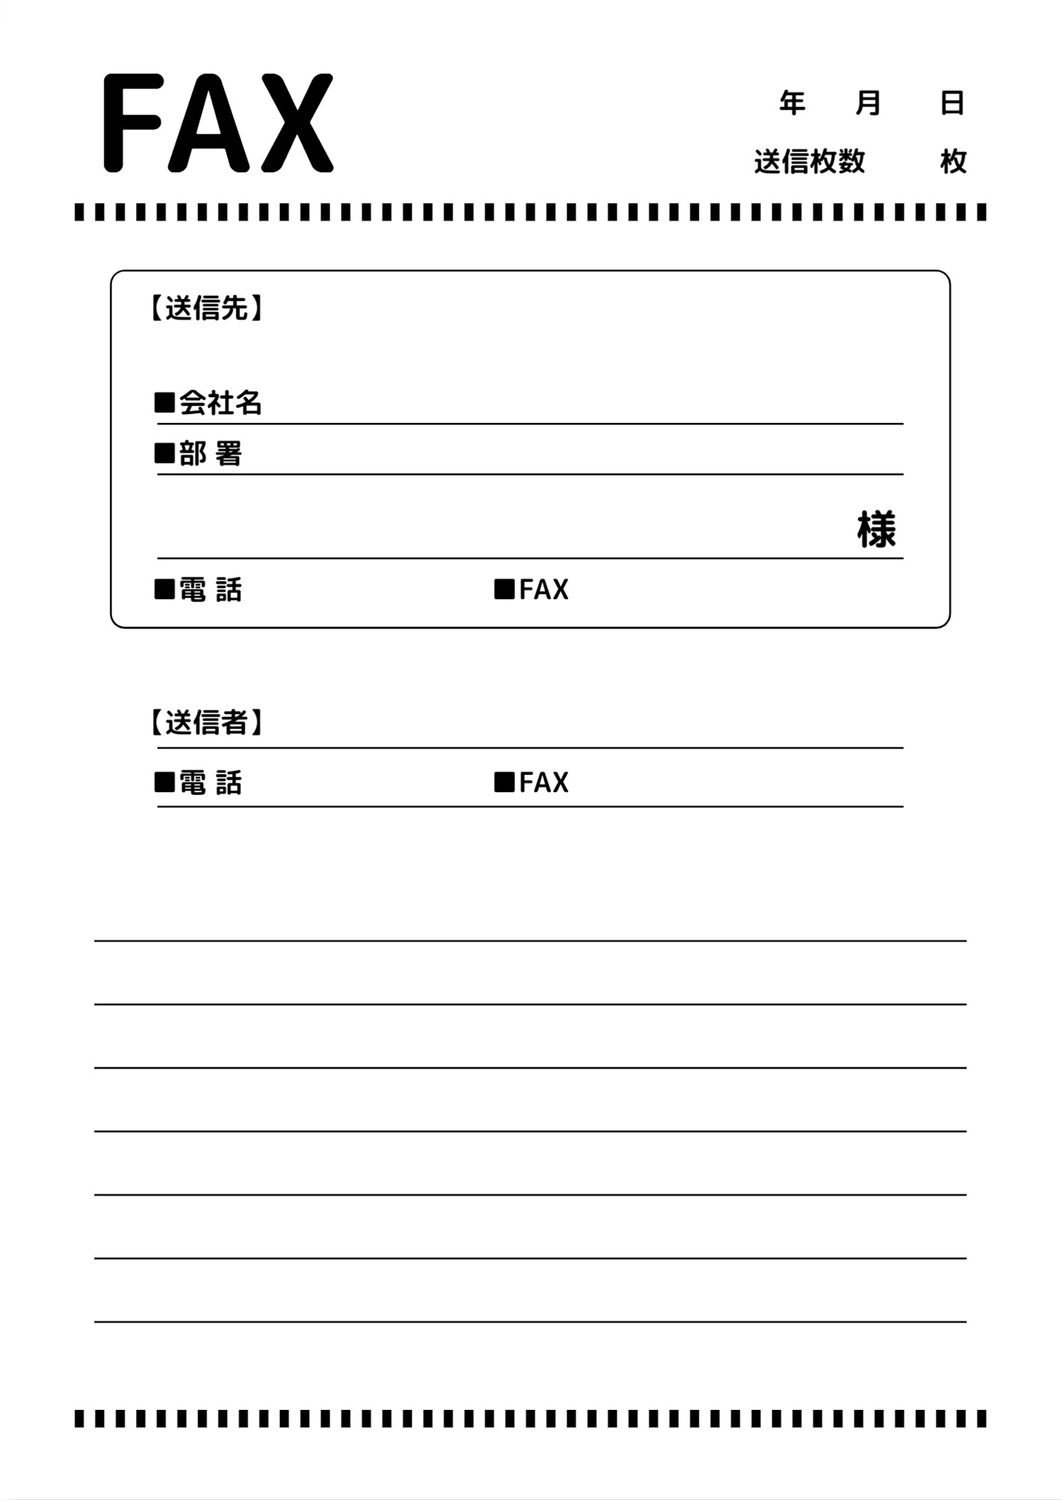 FAX送付状（罫線）, company name, white background, Easy to understand, A4 template